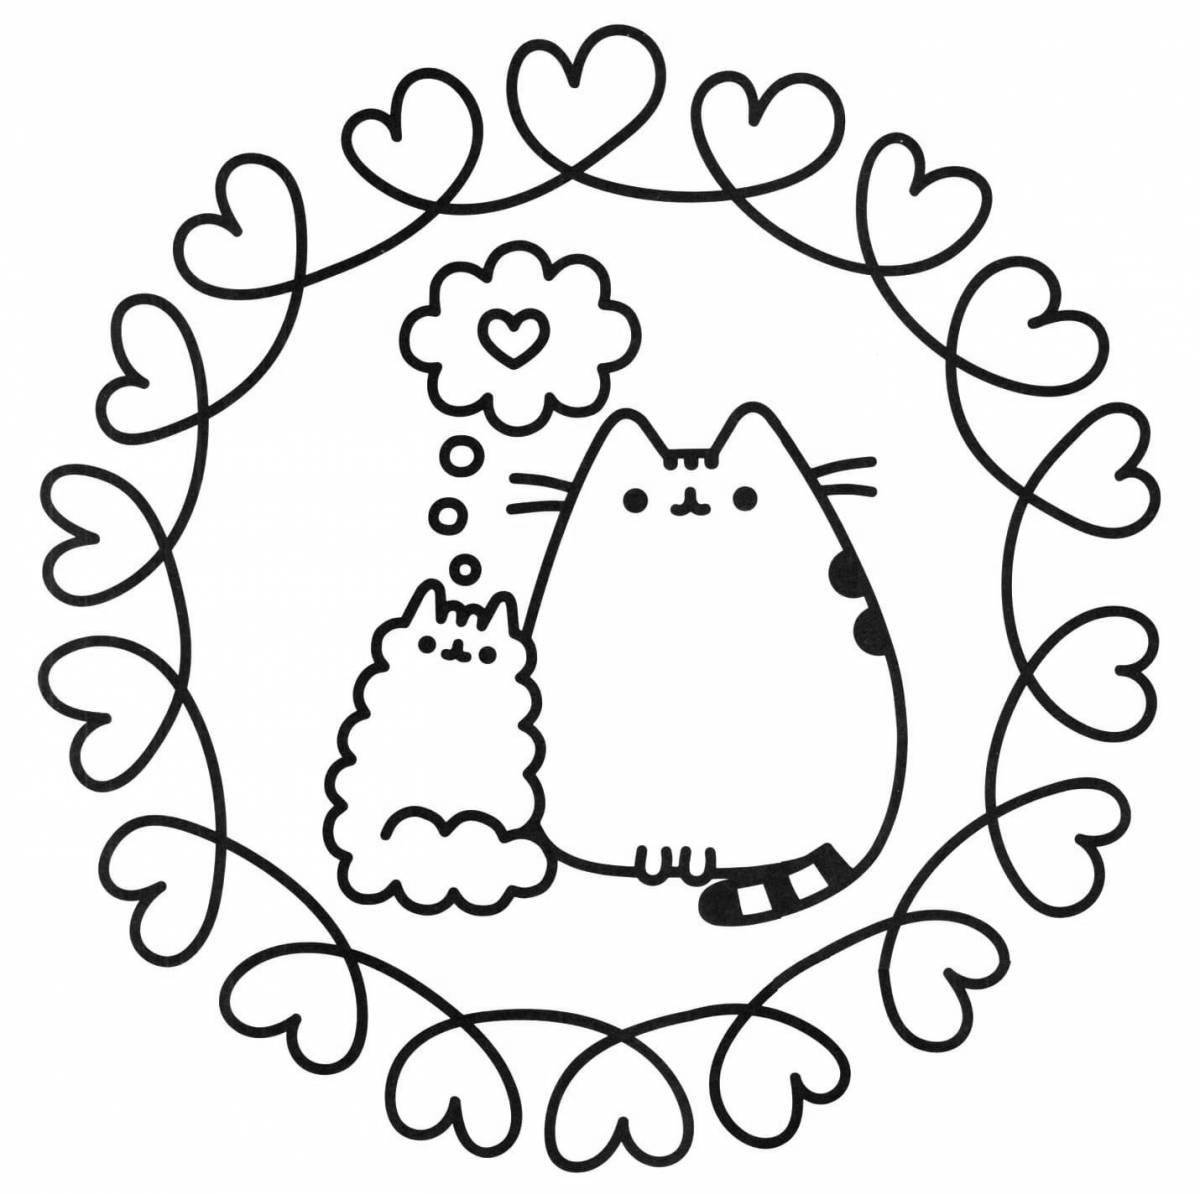 Sunny pusheen kitten coloring page